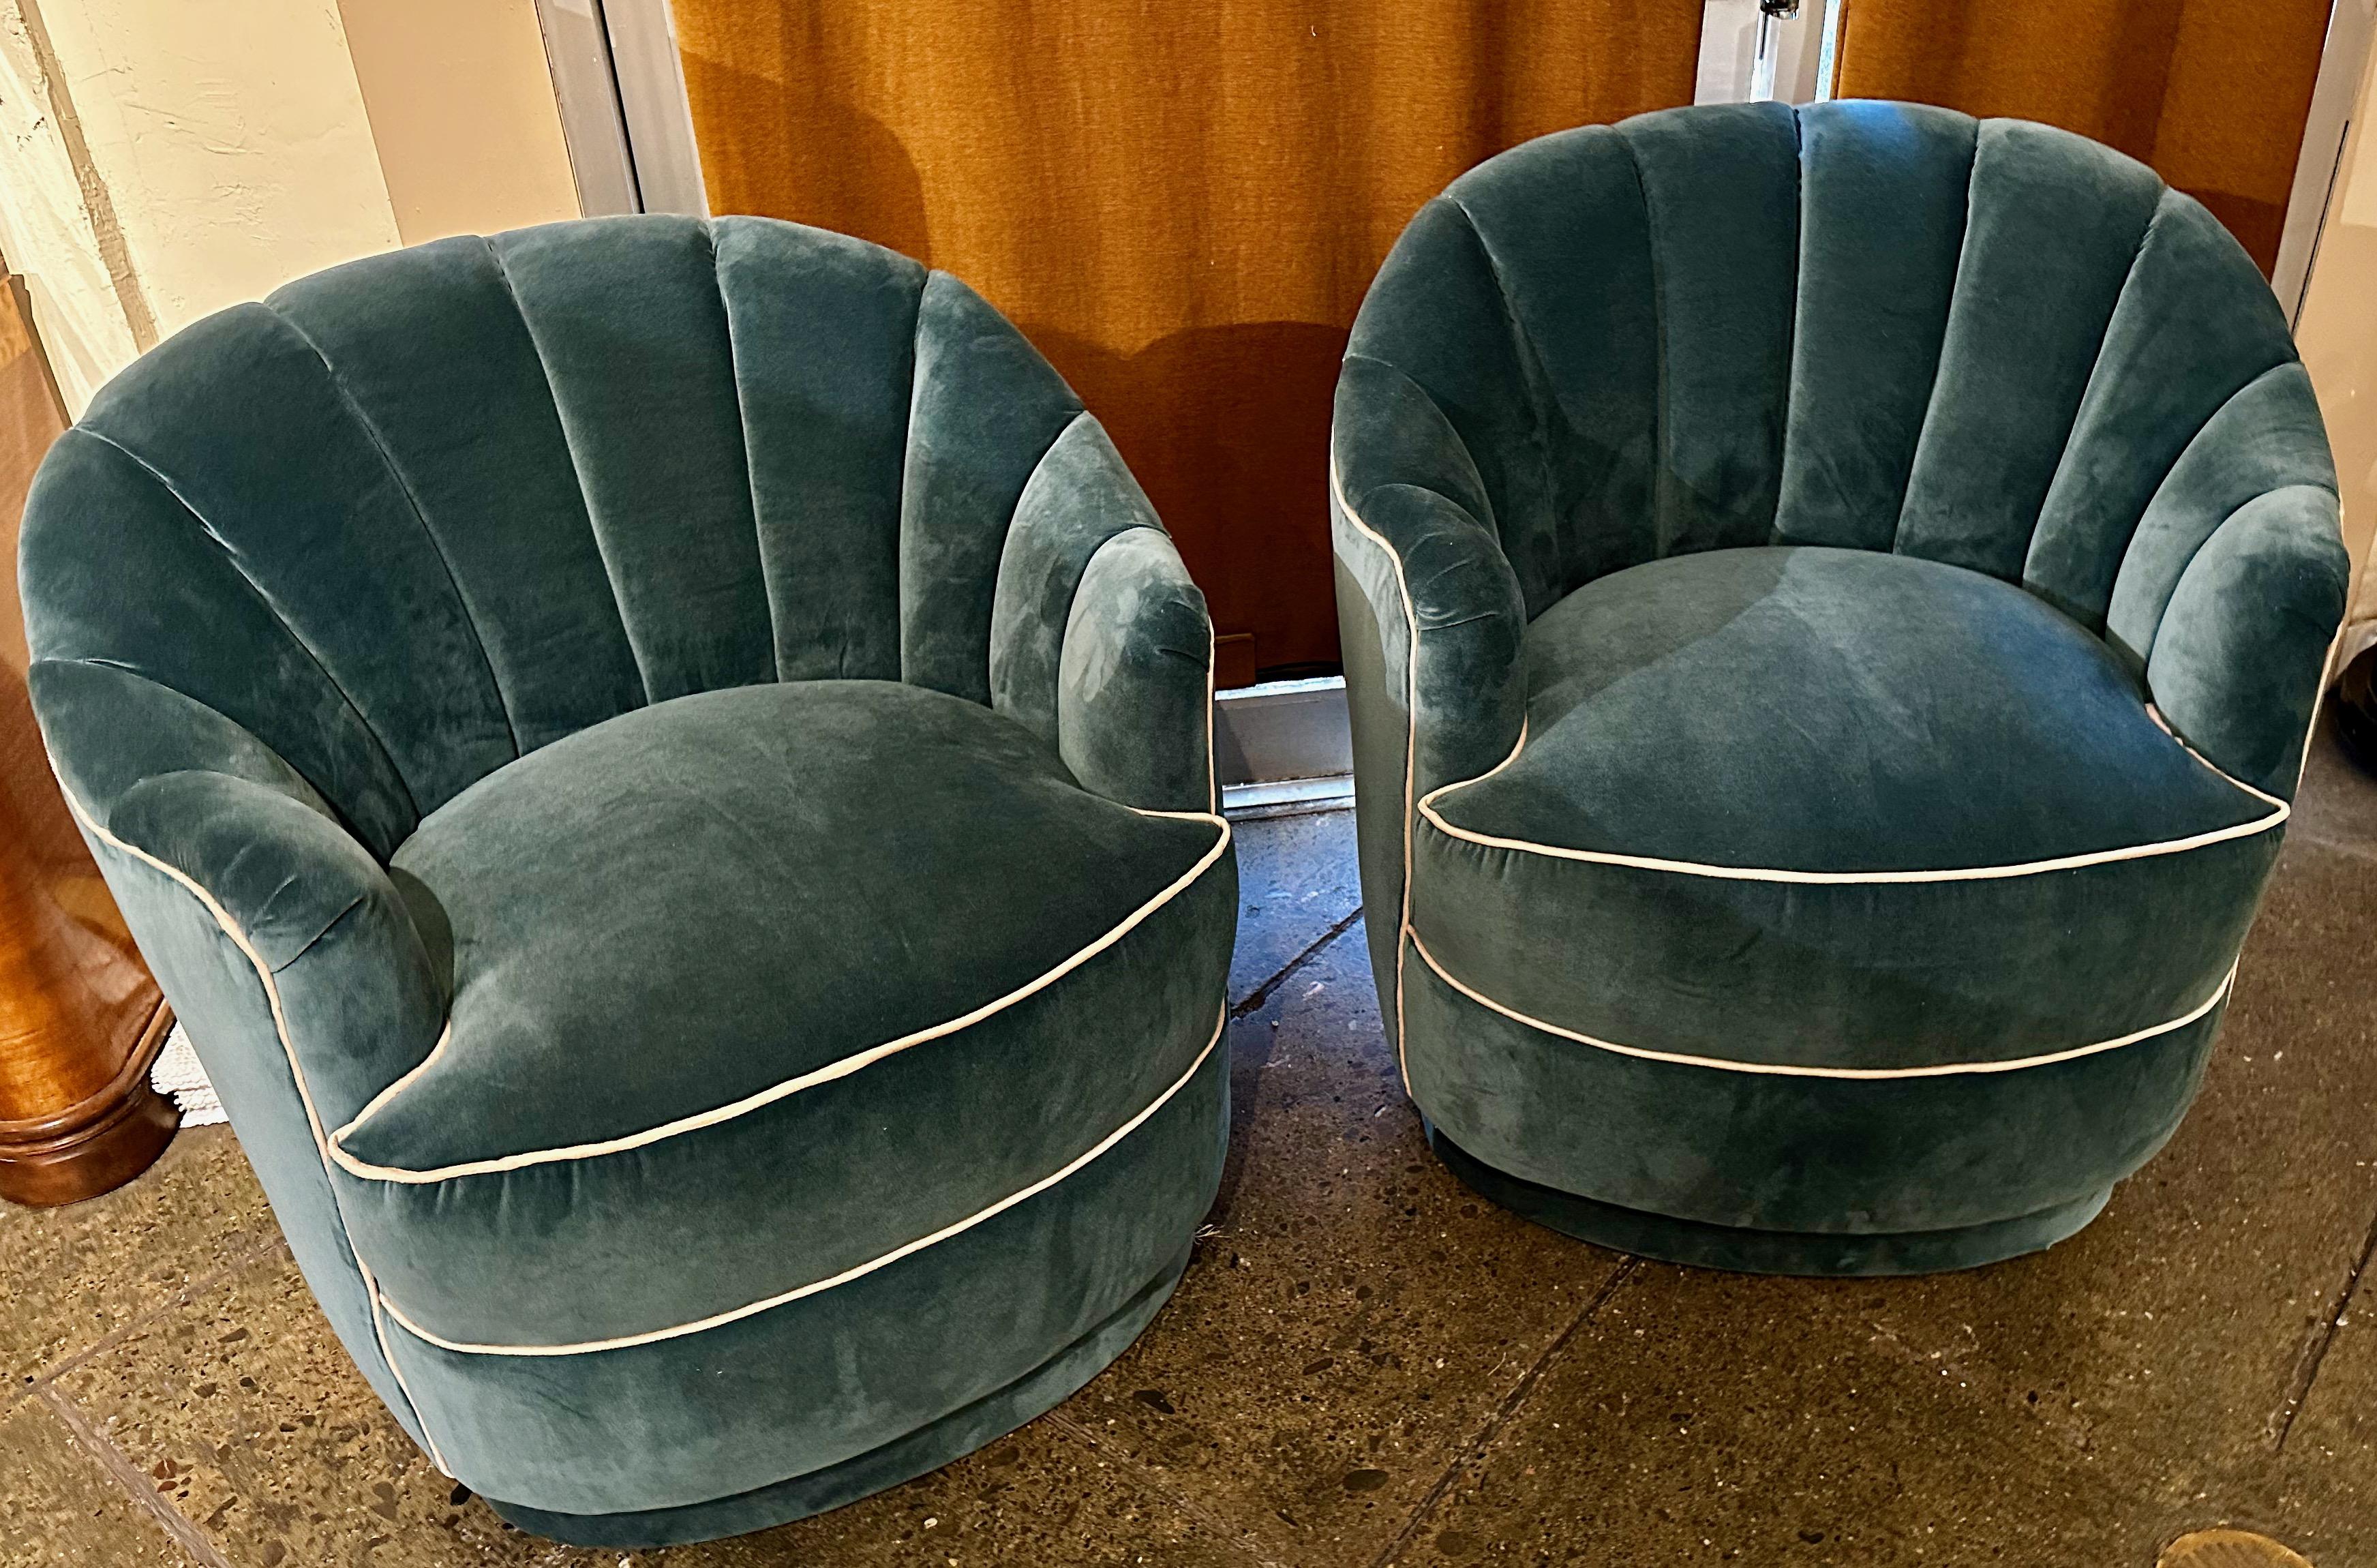 Art Deco Style Channel Back Upholstered Velvet Chairs on Castors. Originally these chairs were very dull by adding an upholstered channel back, we were able to give them a terrific Art Deco look and superb comfort. We added rubber casters so they